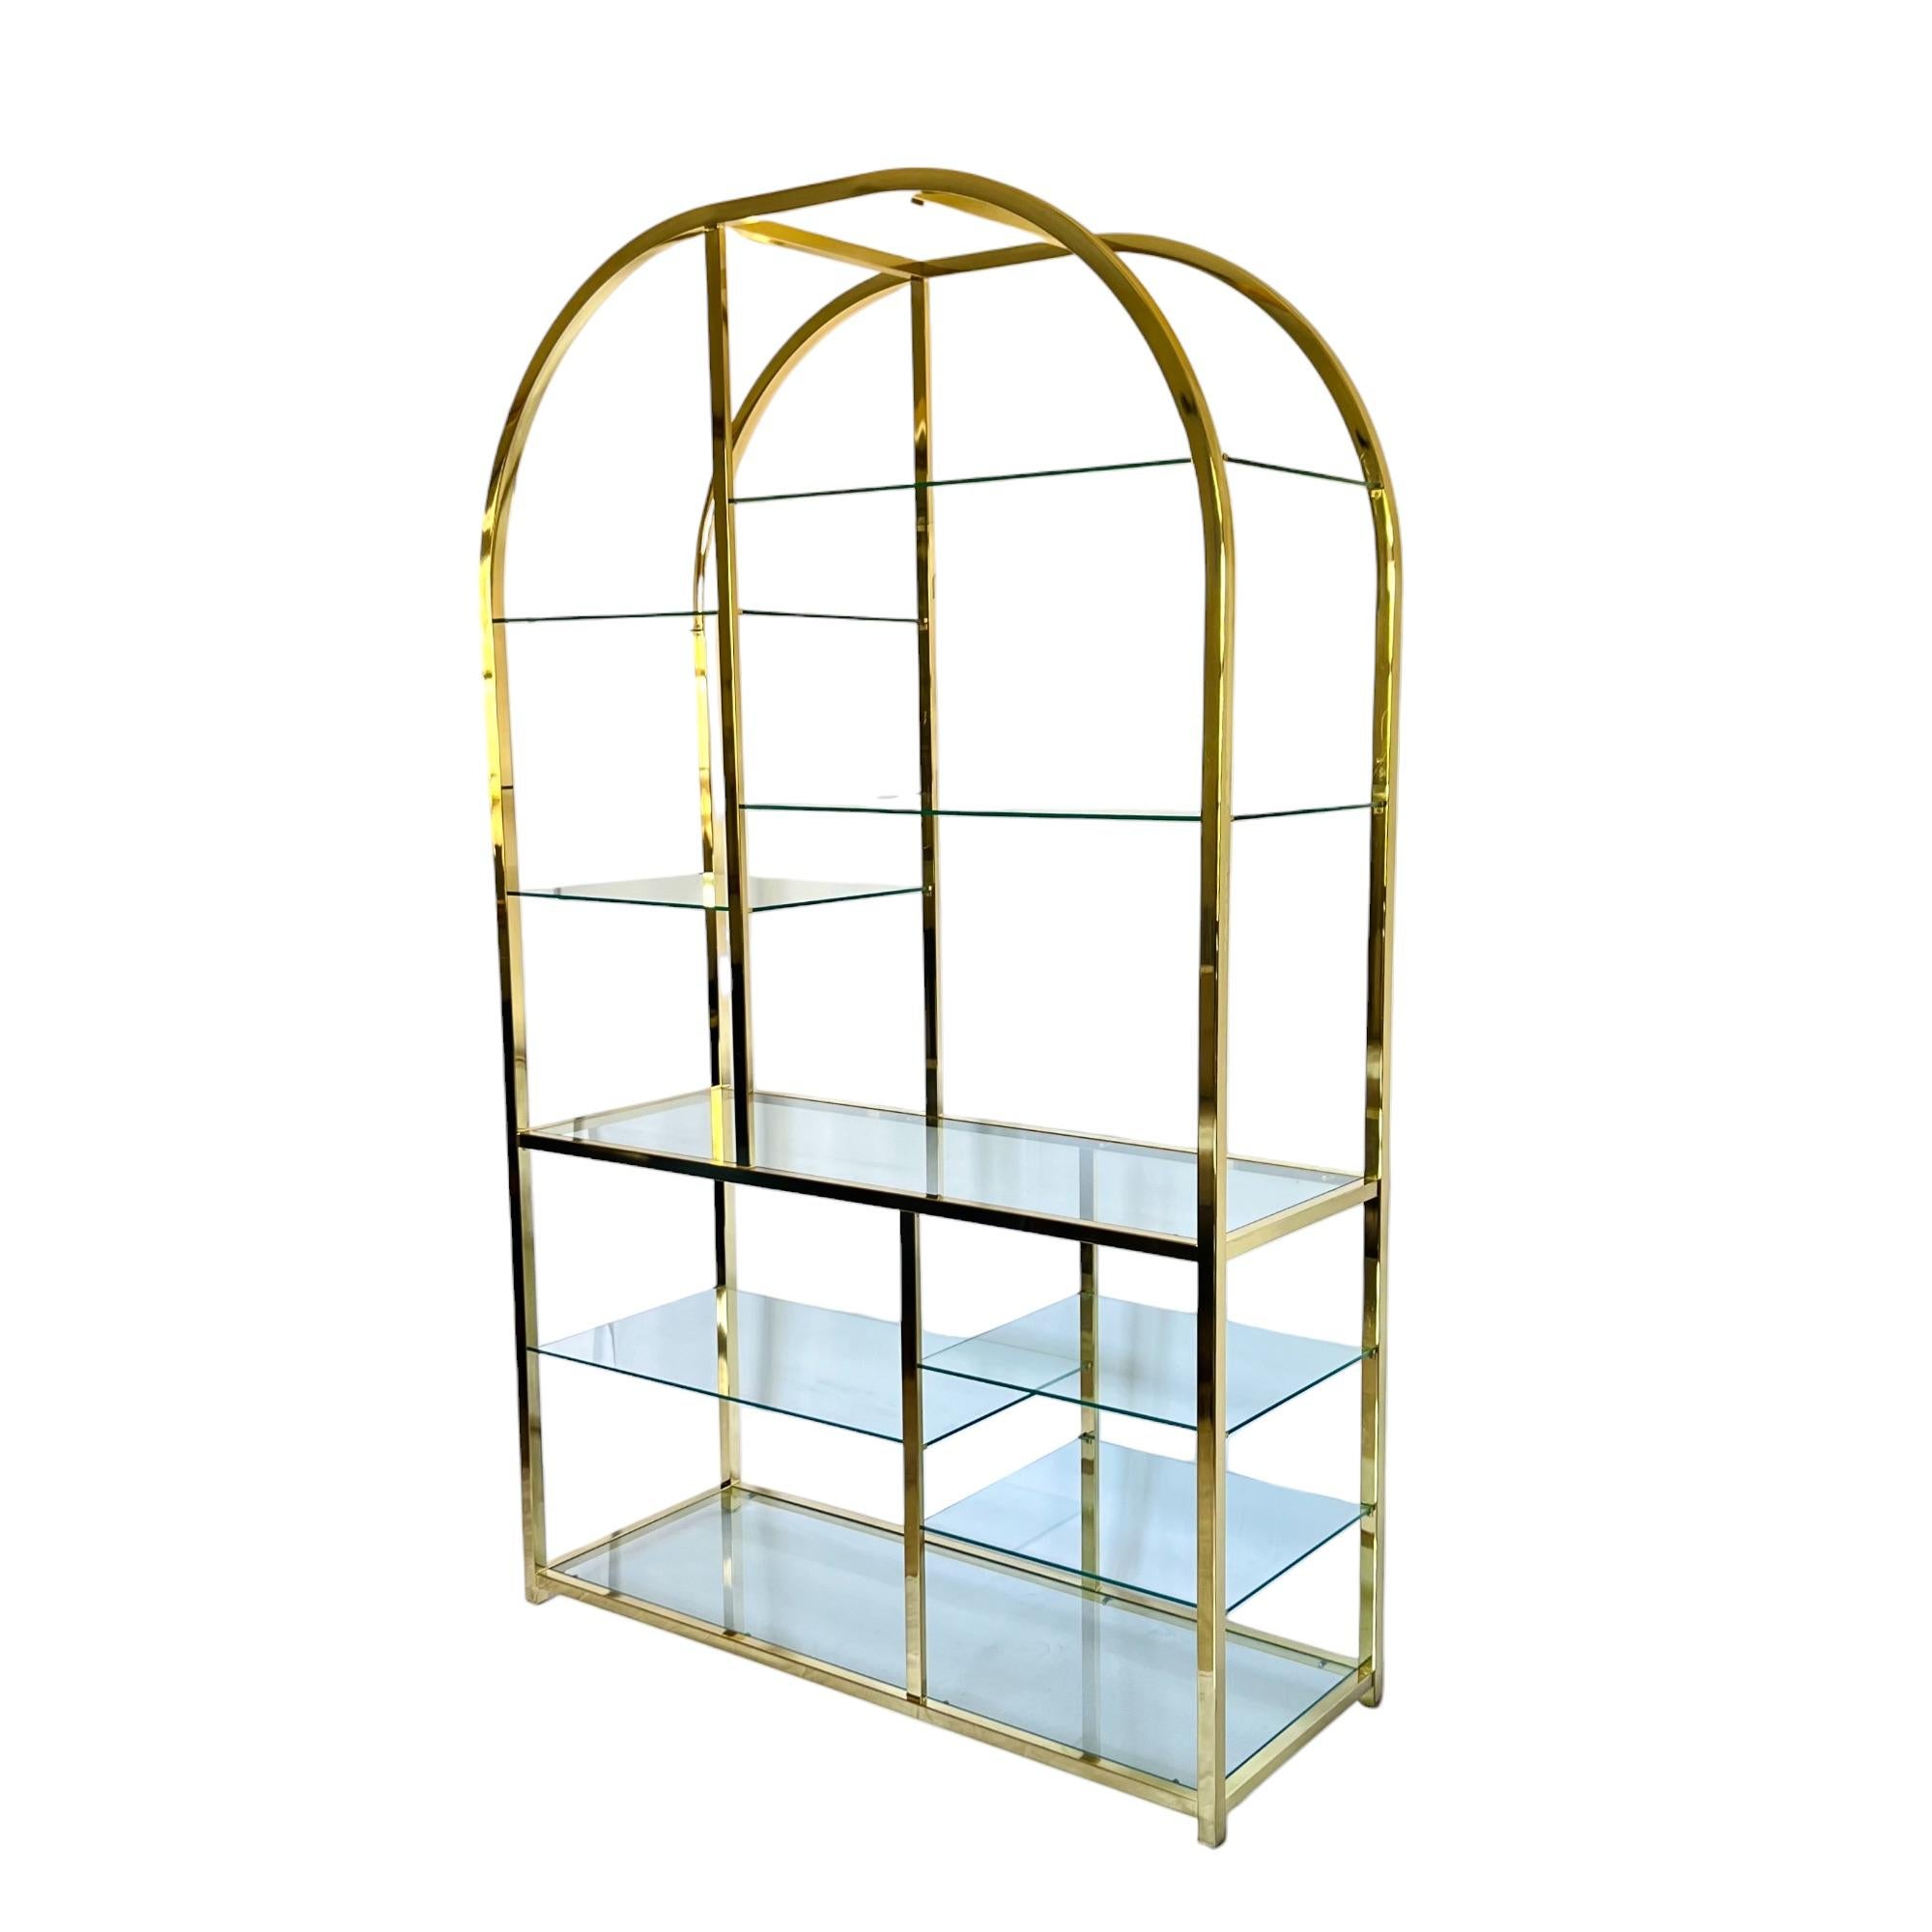 Hollywood Regency Design Institute of America Gold Tiered Glass Arched Etagere, 1985